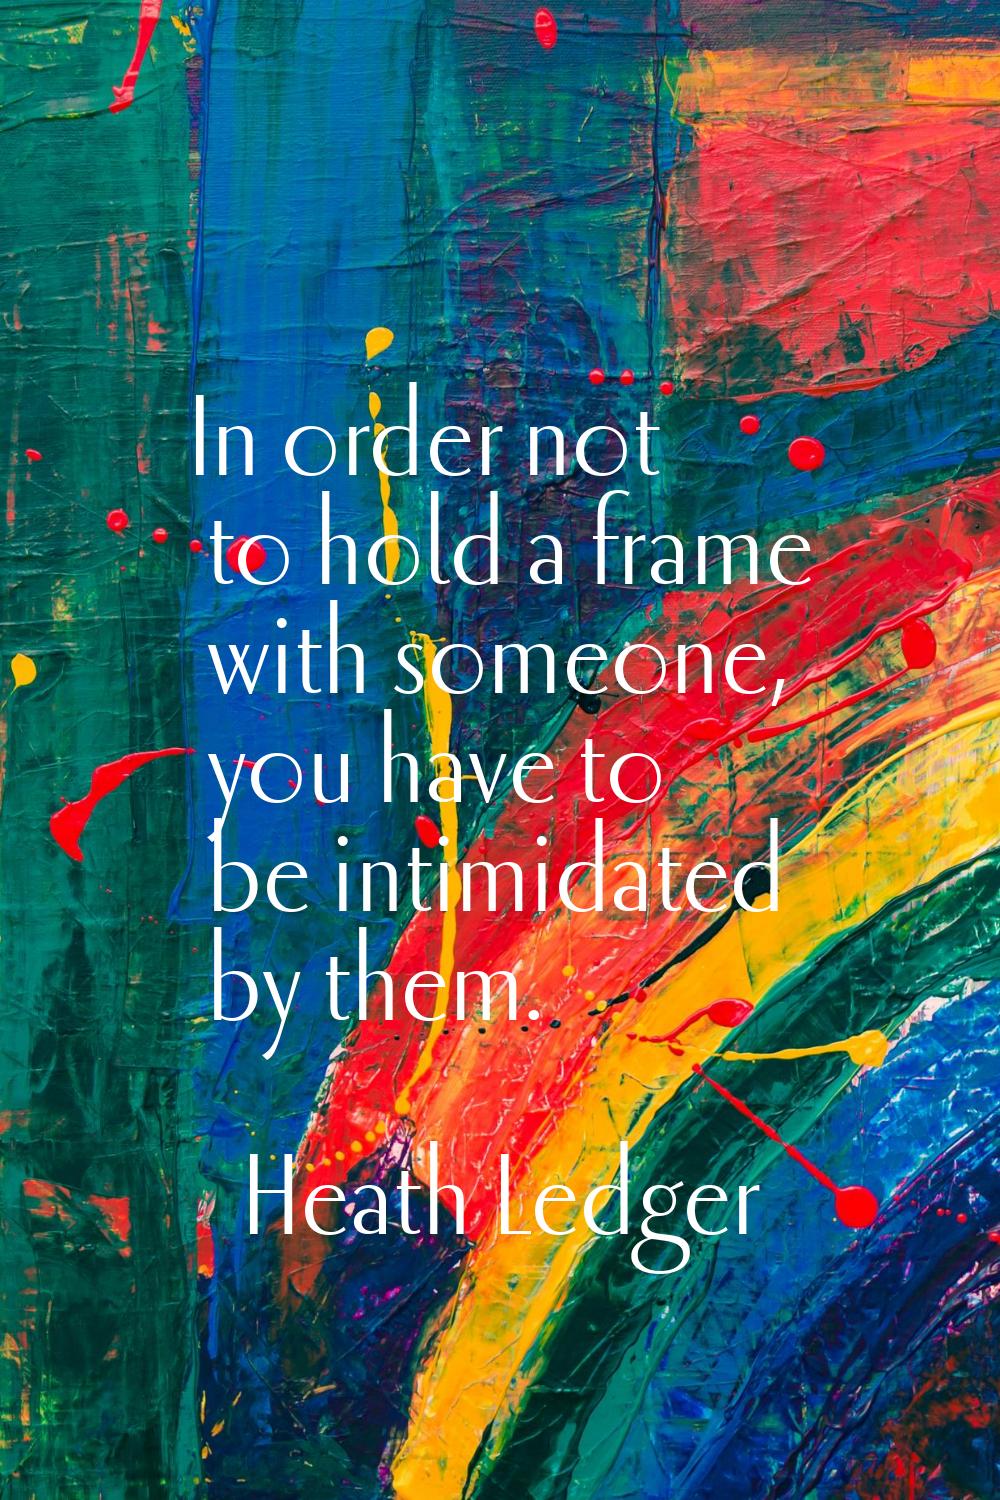 In order not to hold a frame with someone, you have to be intimidated by them.